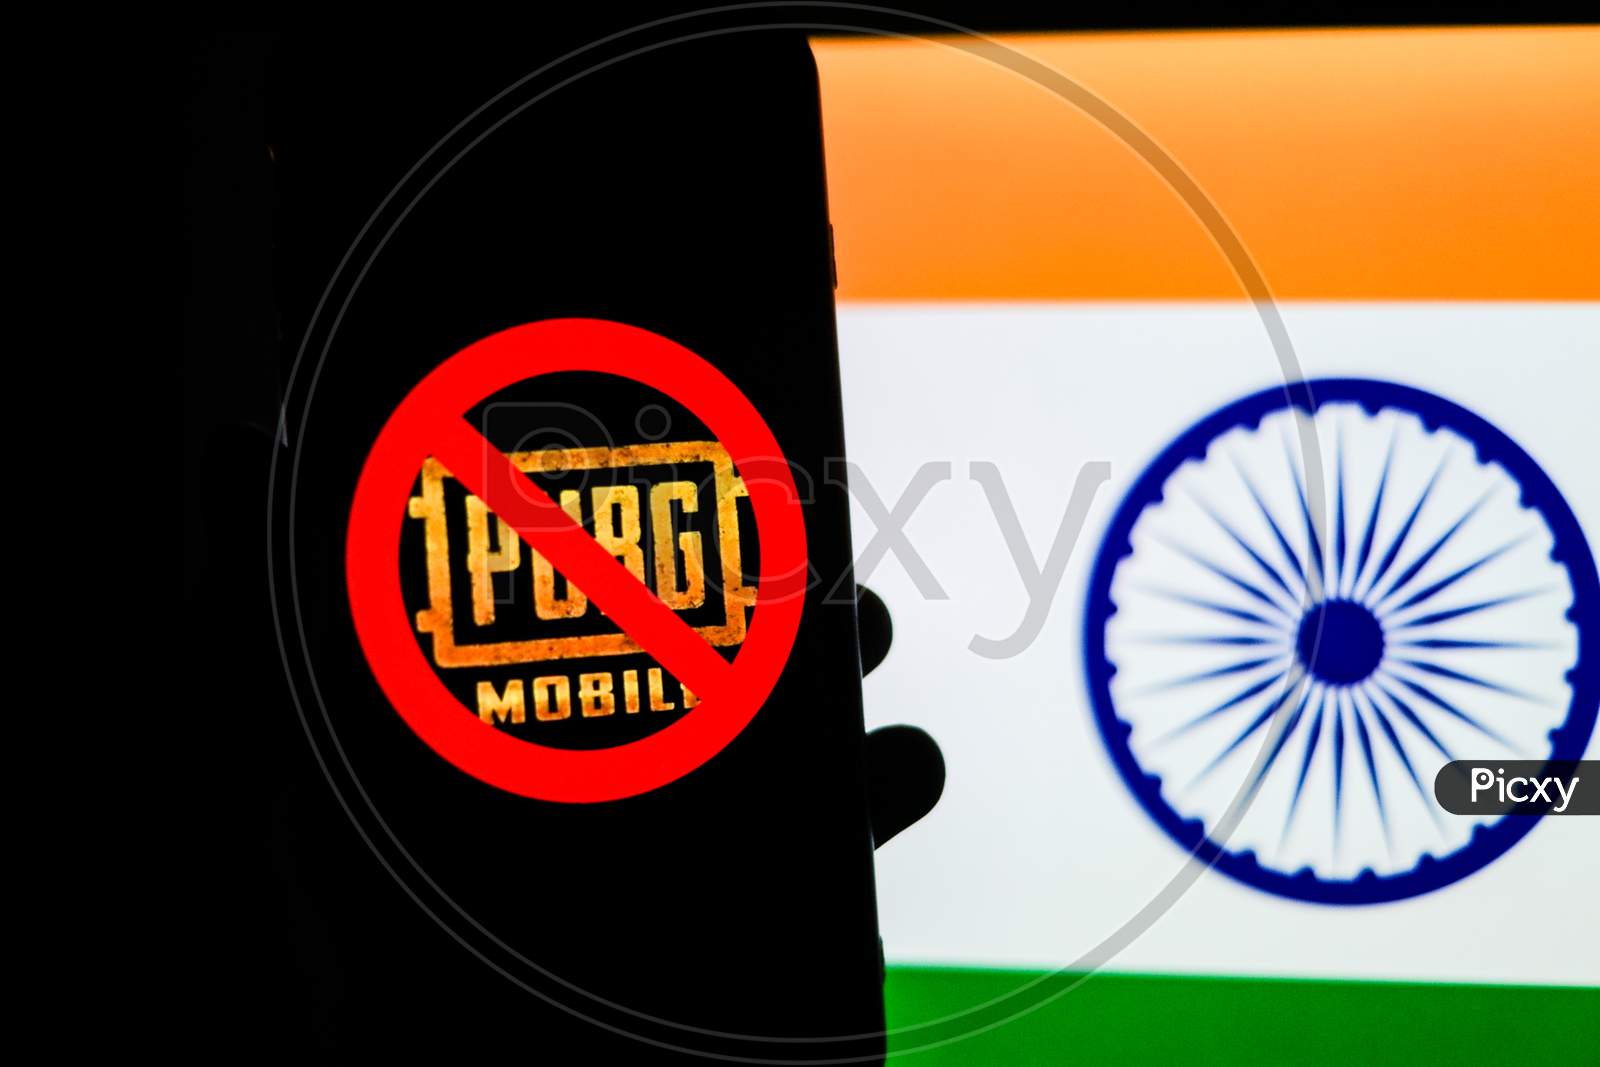 Banned PUBG or Playerunknown's Battlegrounds Game Logo on Smartphone Screen with Indian Flag in the Background